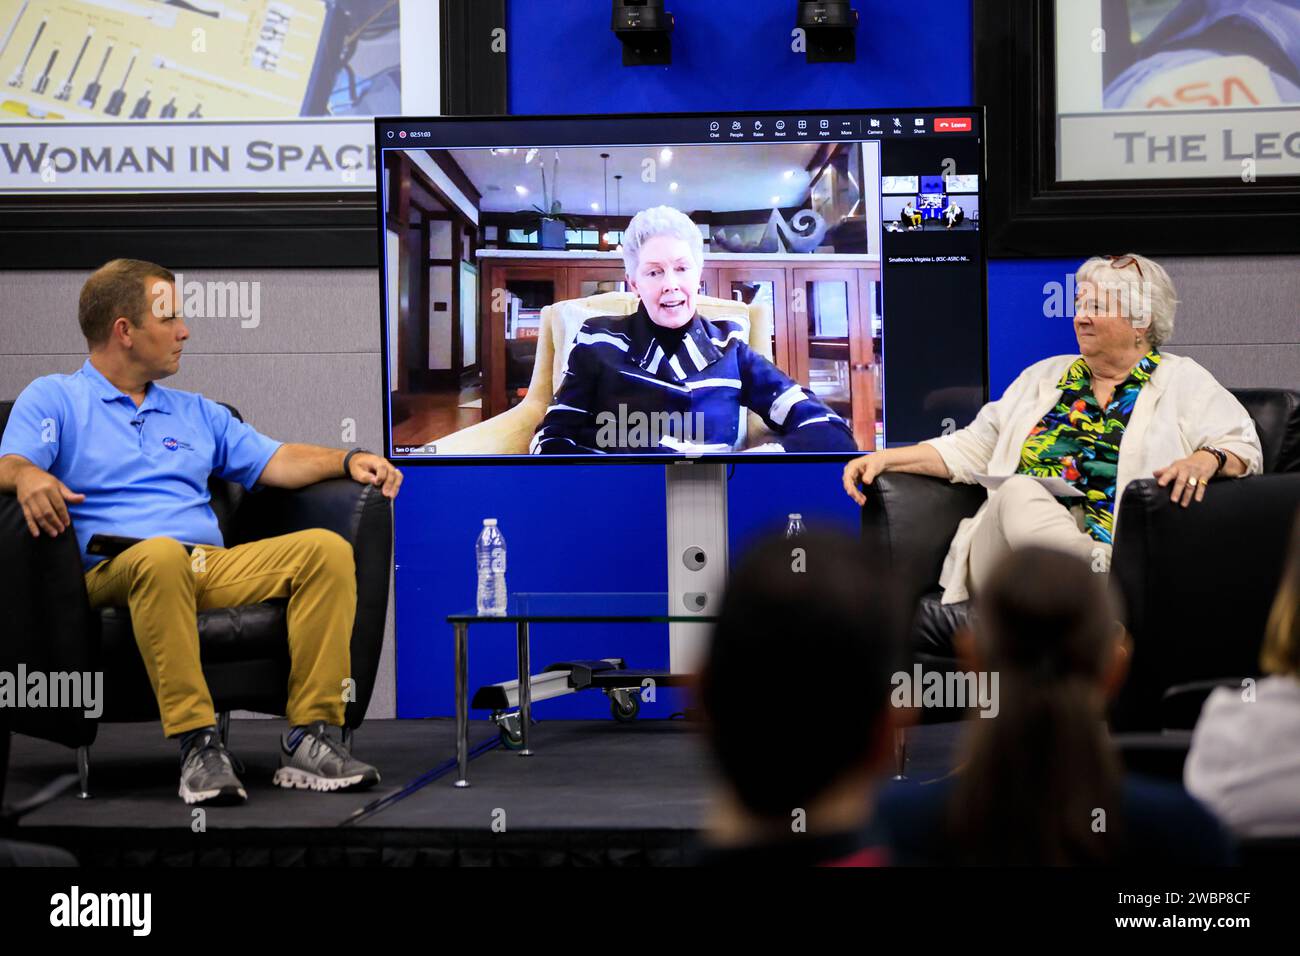 Tam O’Shaughnessy, center (on the monitor), speaks during “The Legacy of Sally Ride: The First American Woman in Space” event at Kennedy Space Center in Florida on June 15, 2023. O’Shaughnessy was Ride’s lifetime partner for 27 years, until the pioneering astronaut died in 2012 at age 61 from pancreatic cancer. NASA Chief Historian Brian Odom, left, and Bear Ride, Sally Ride’s sister, also participated in the event. Forty years ago, Ride made her trailblazing flight into space. She also was a physicist and a steadfast advocate for inclusion in STEM (science, technology, engineering, mathematic Stock Photo